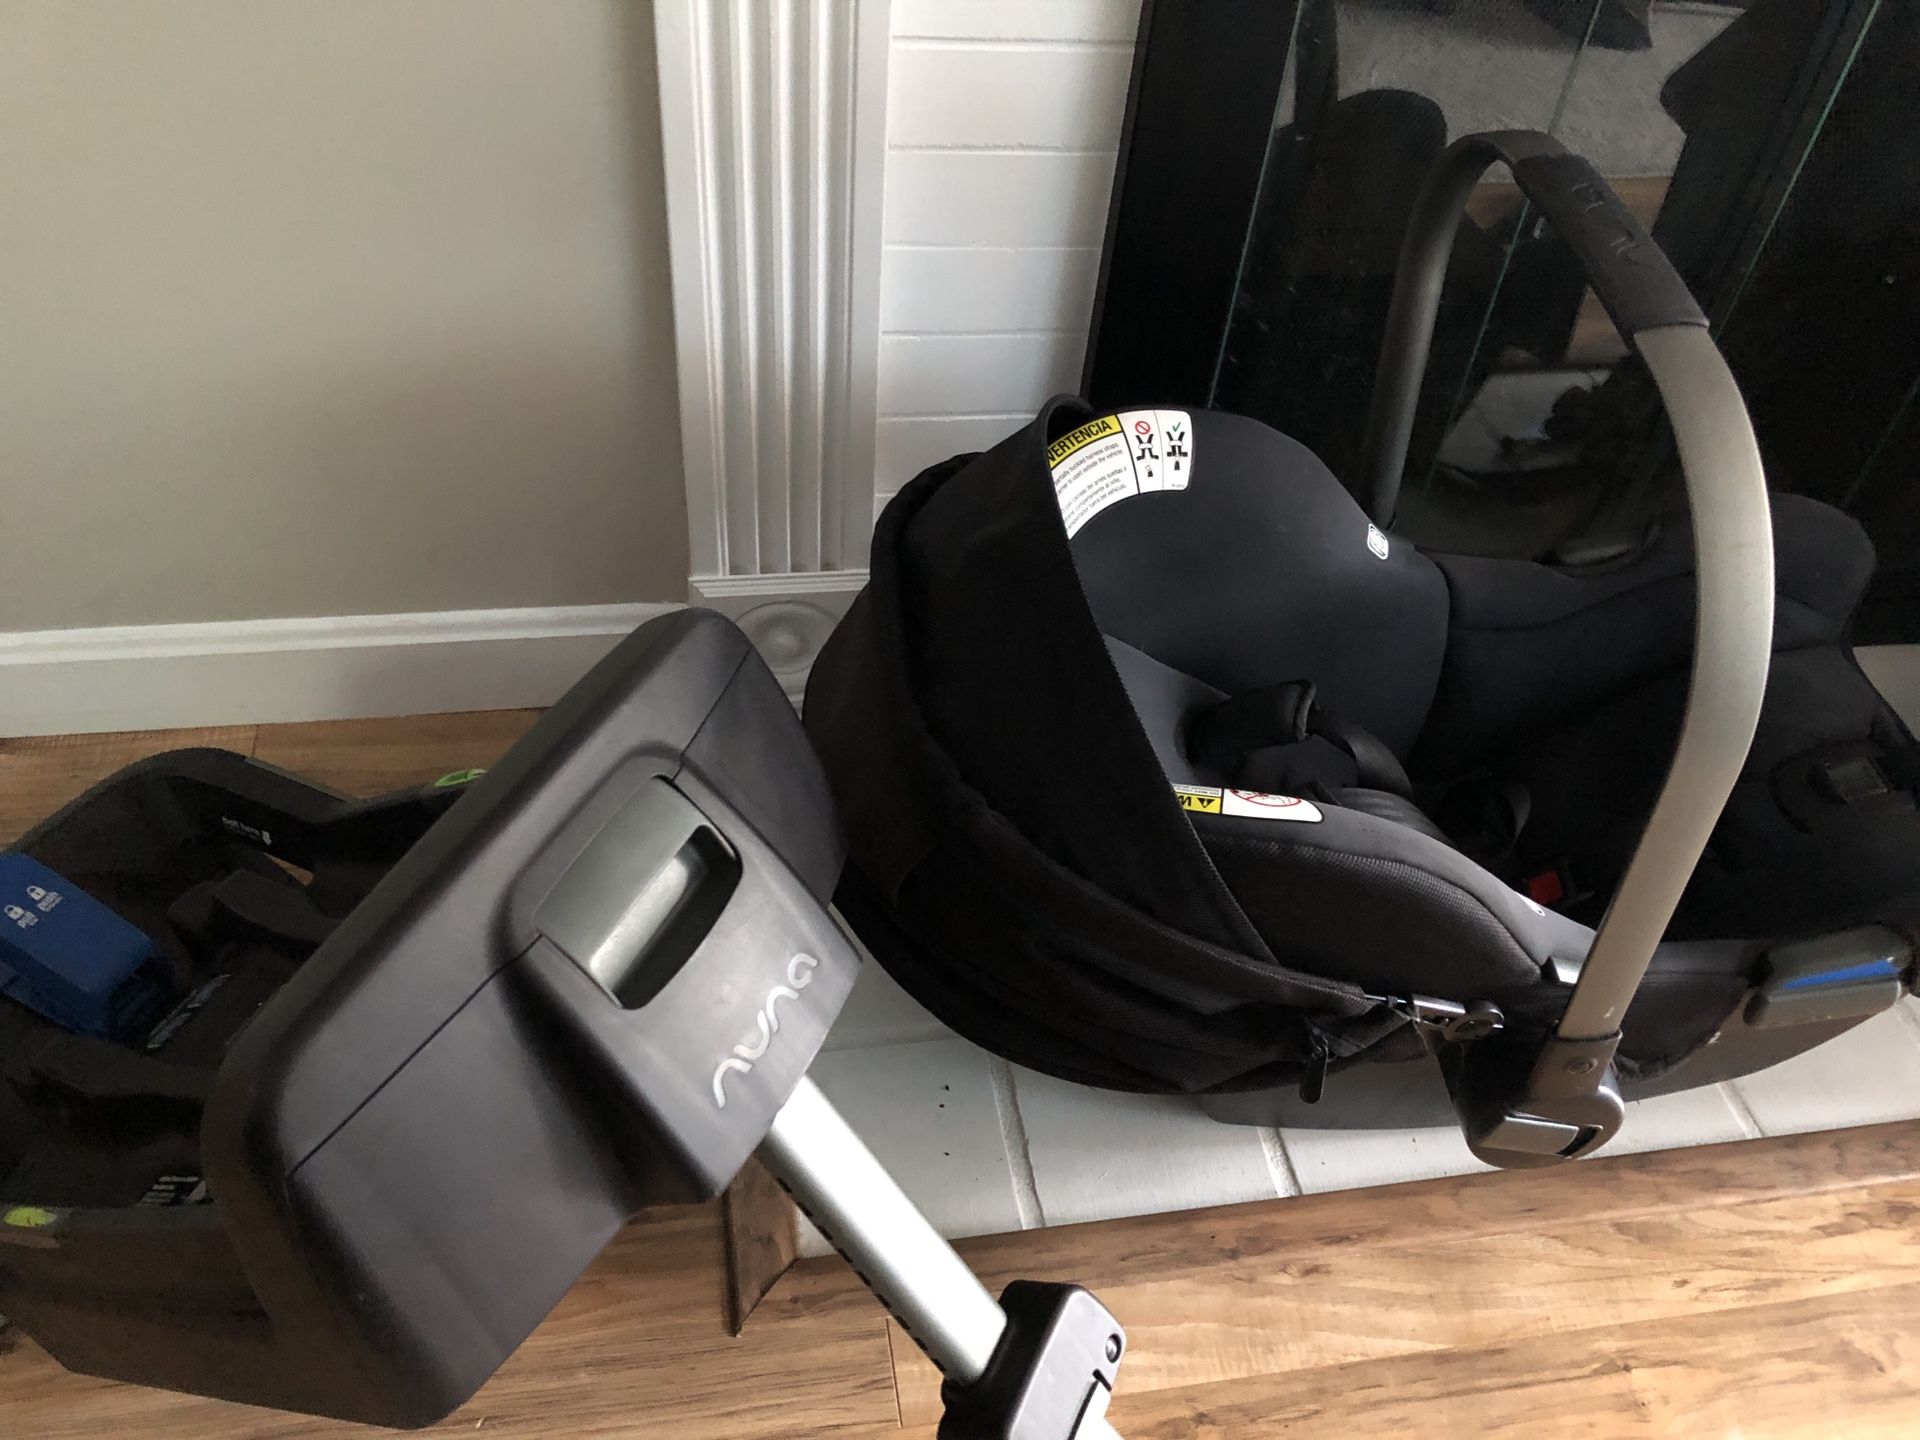 Nuna car seat and two bases (only one shown)